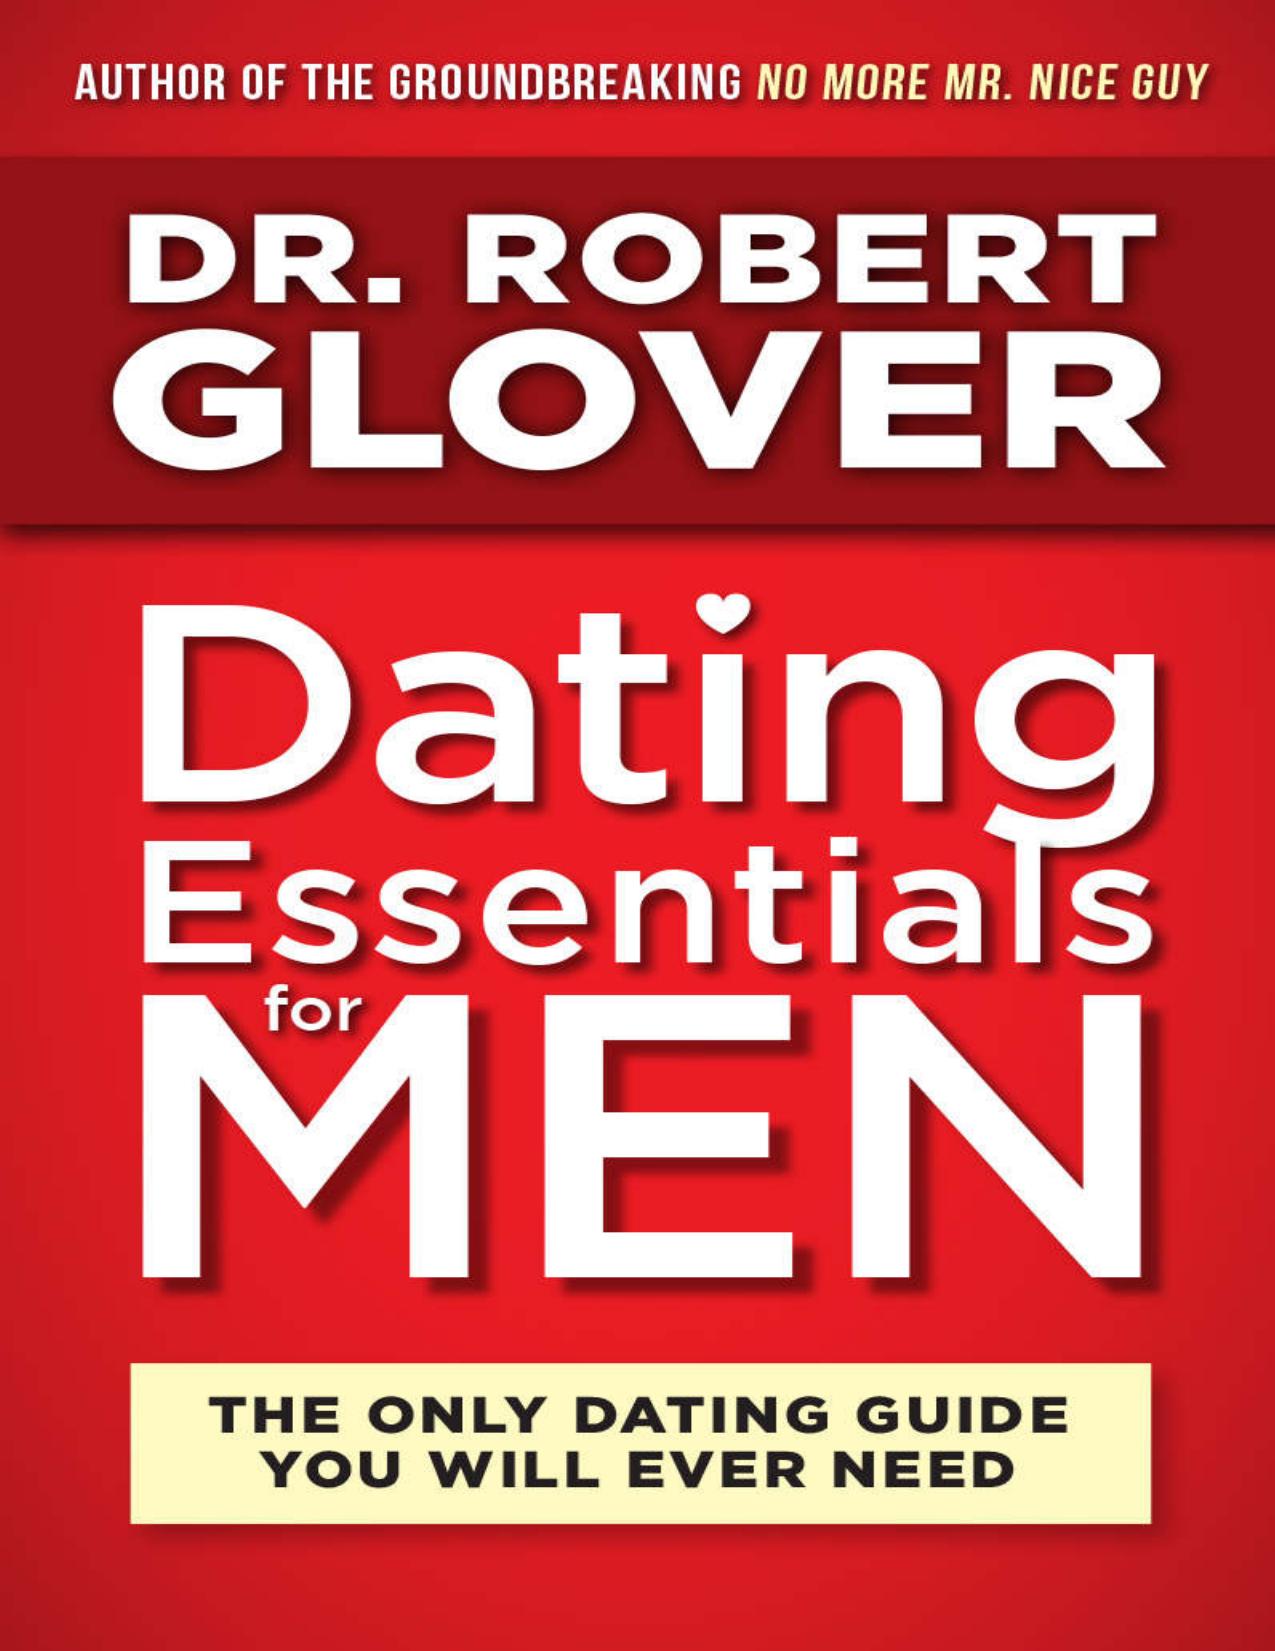 Dating Essentials for Men by Glover Dr. Robert